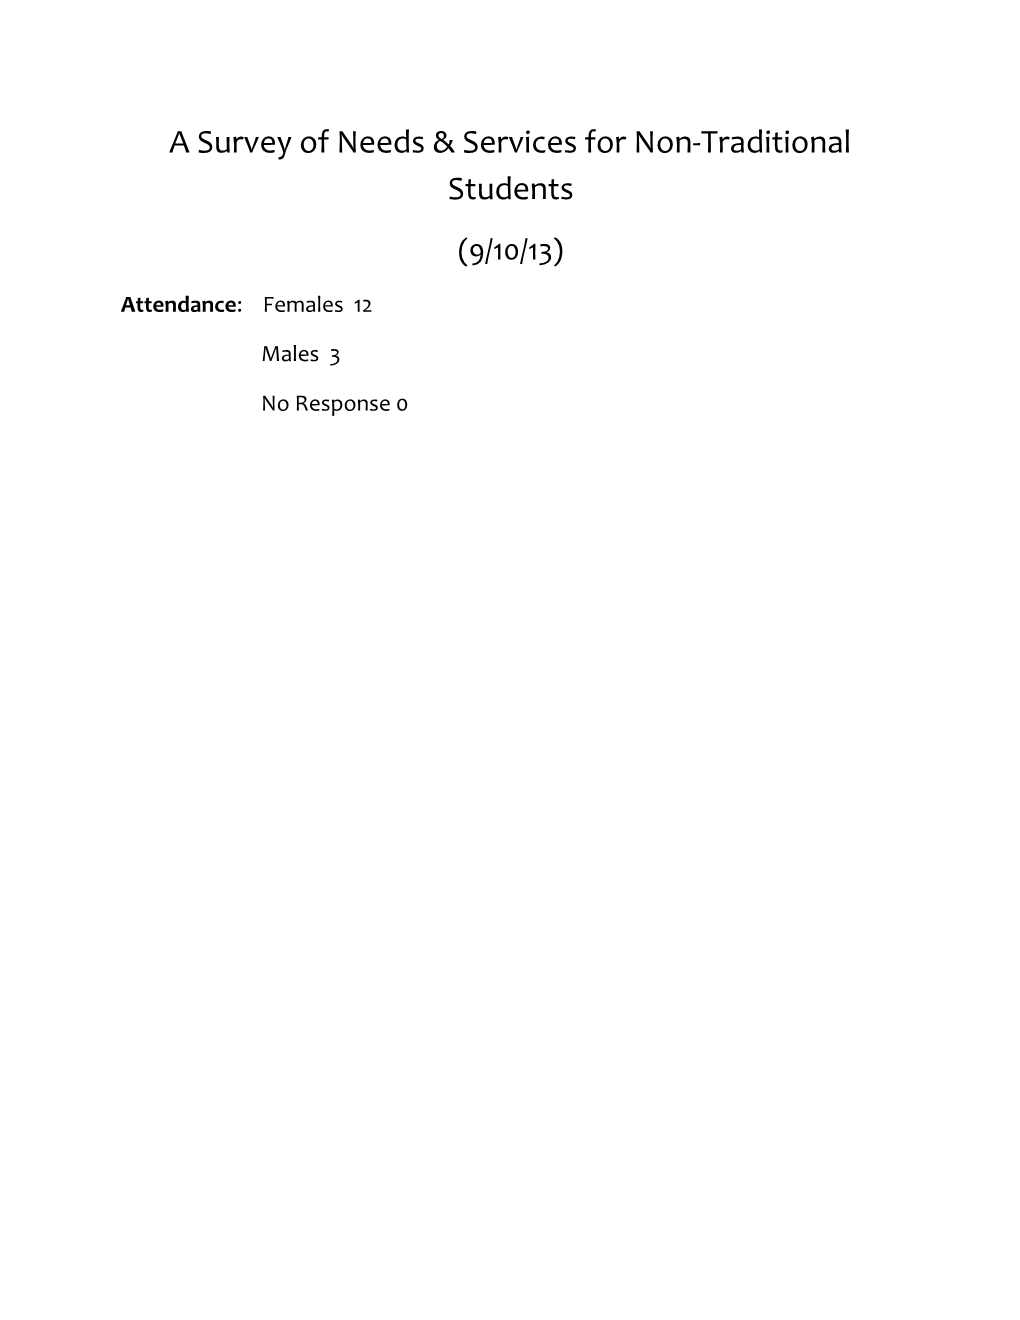 A Survey of Needs & Services for Non-Traditional Students